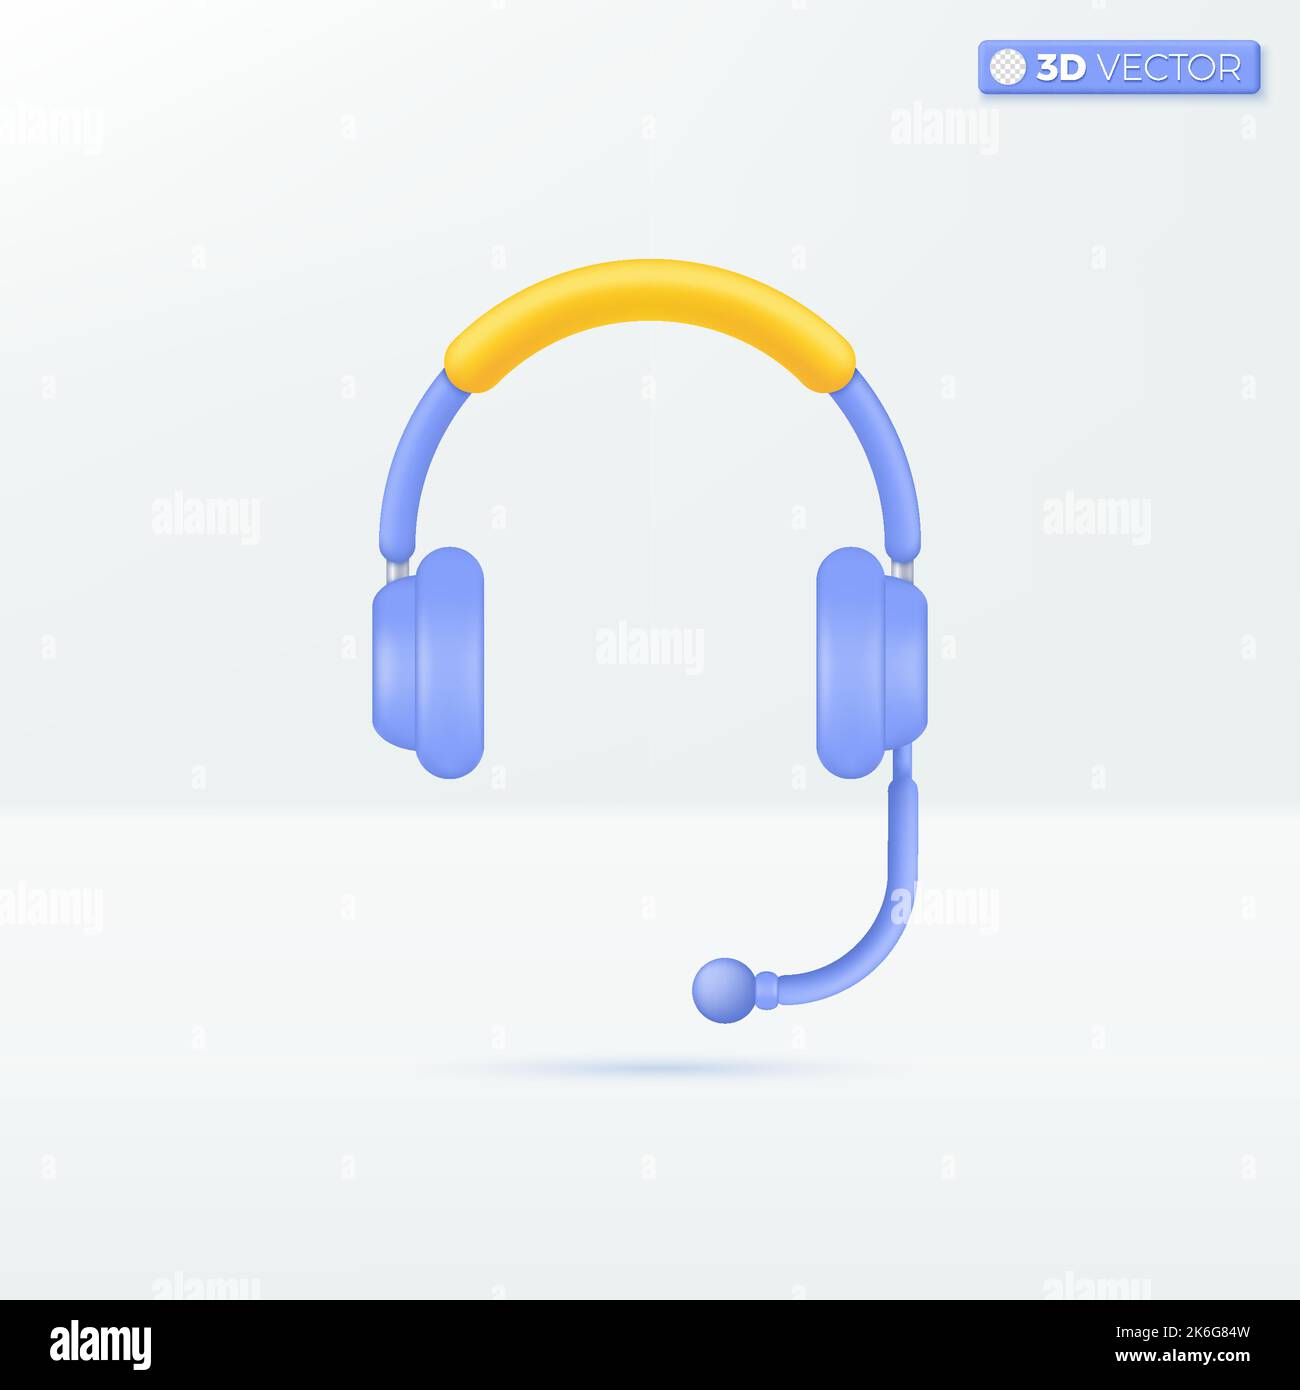 Headphone with microphone icon symbols. operators, call center, communicationt concept. 3D vector isolated illustration design. Cartoon pastel Minimal Stock Vector